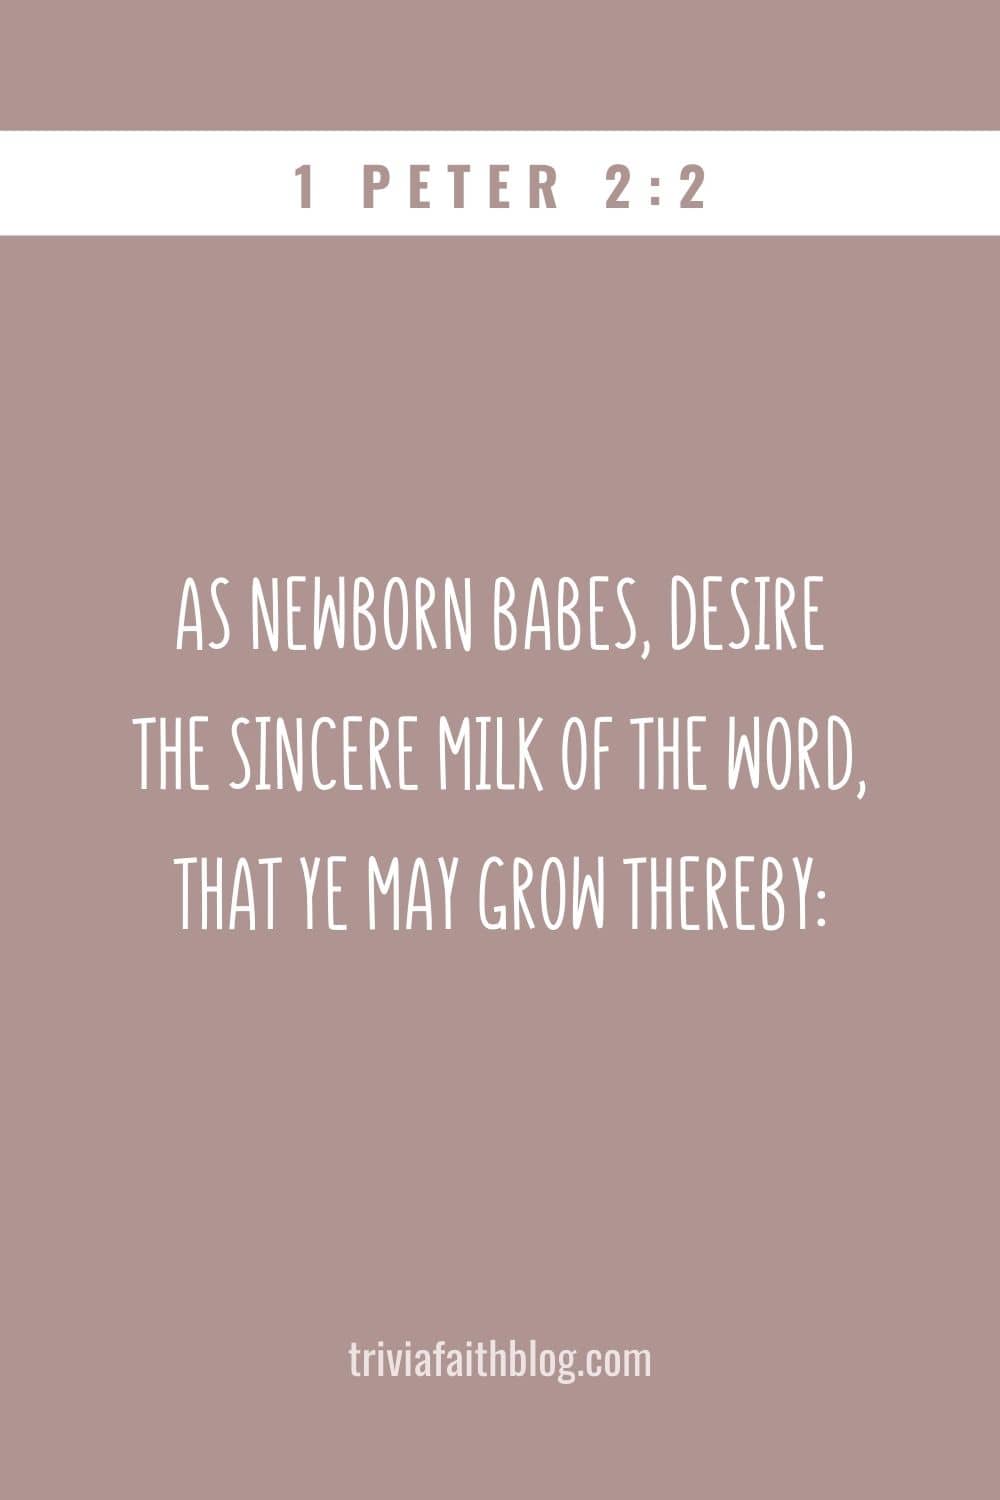 As newborn babes, desire the sincere milk of the word, that ye may grow thereby